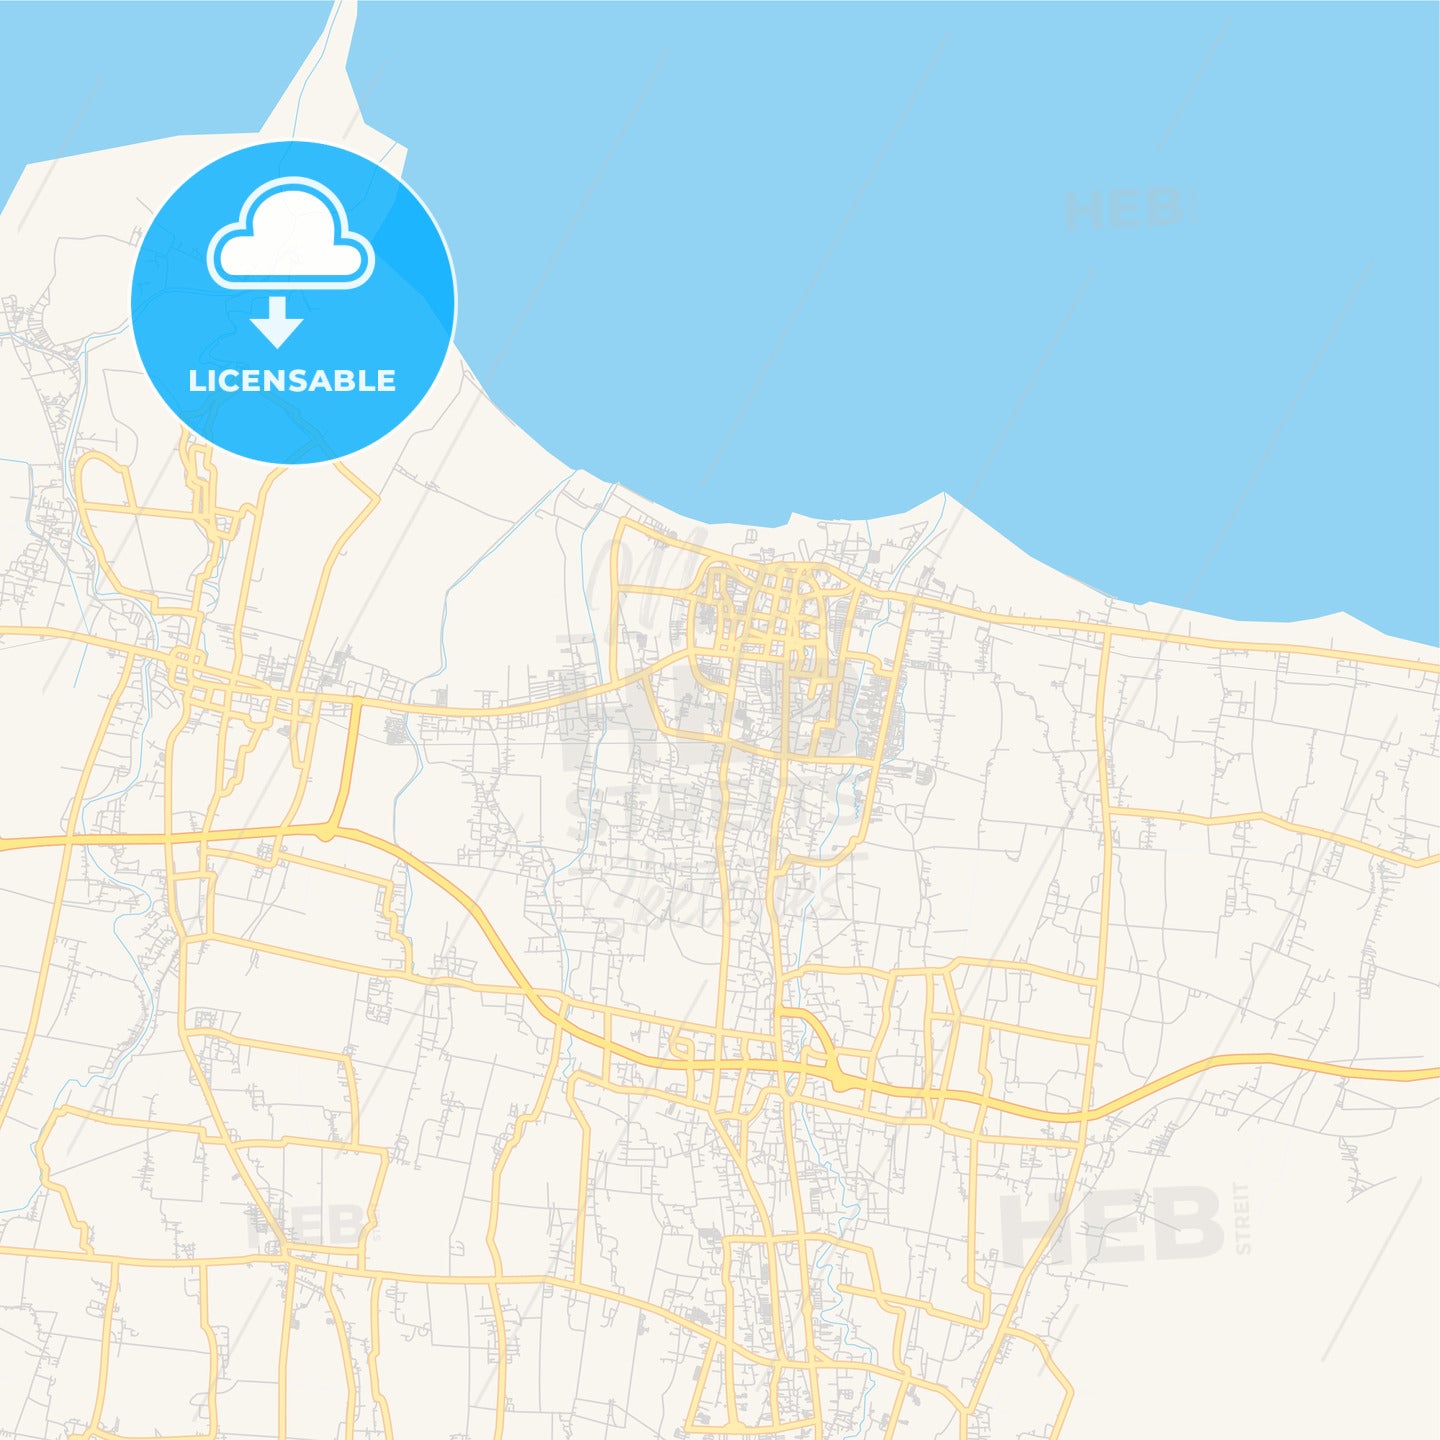 Printable street map of Tegal, Indonesia